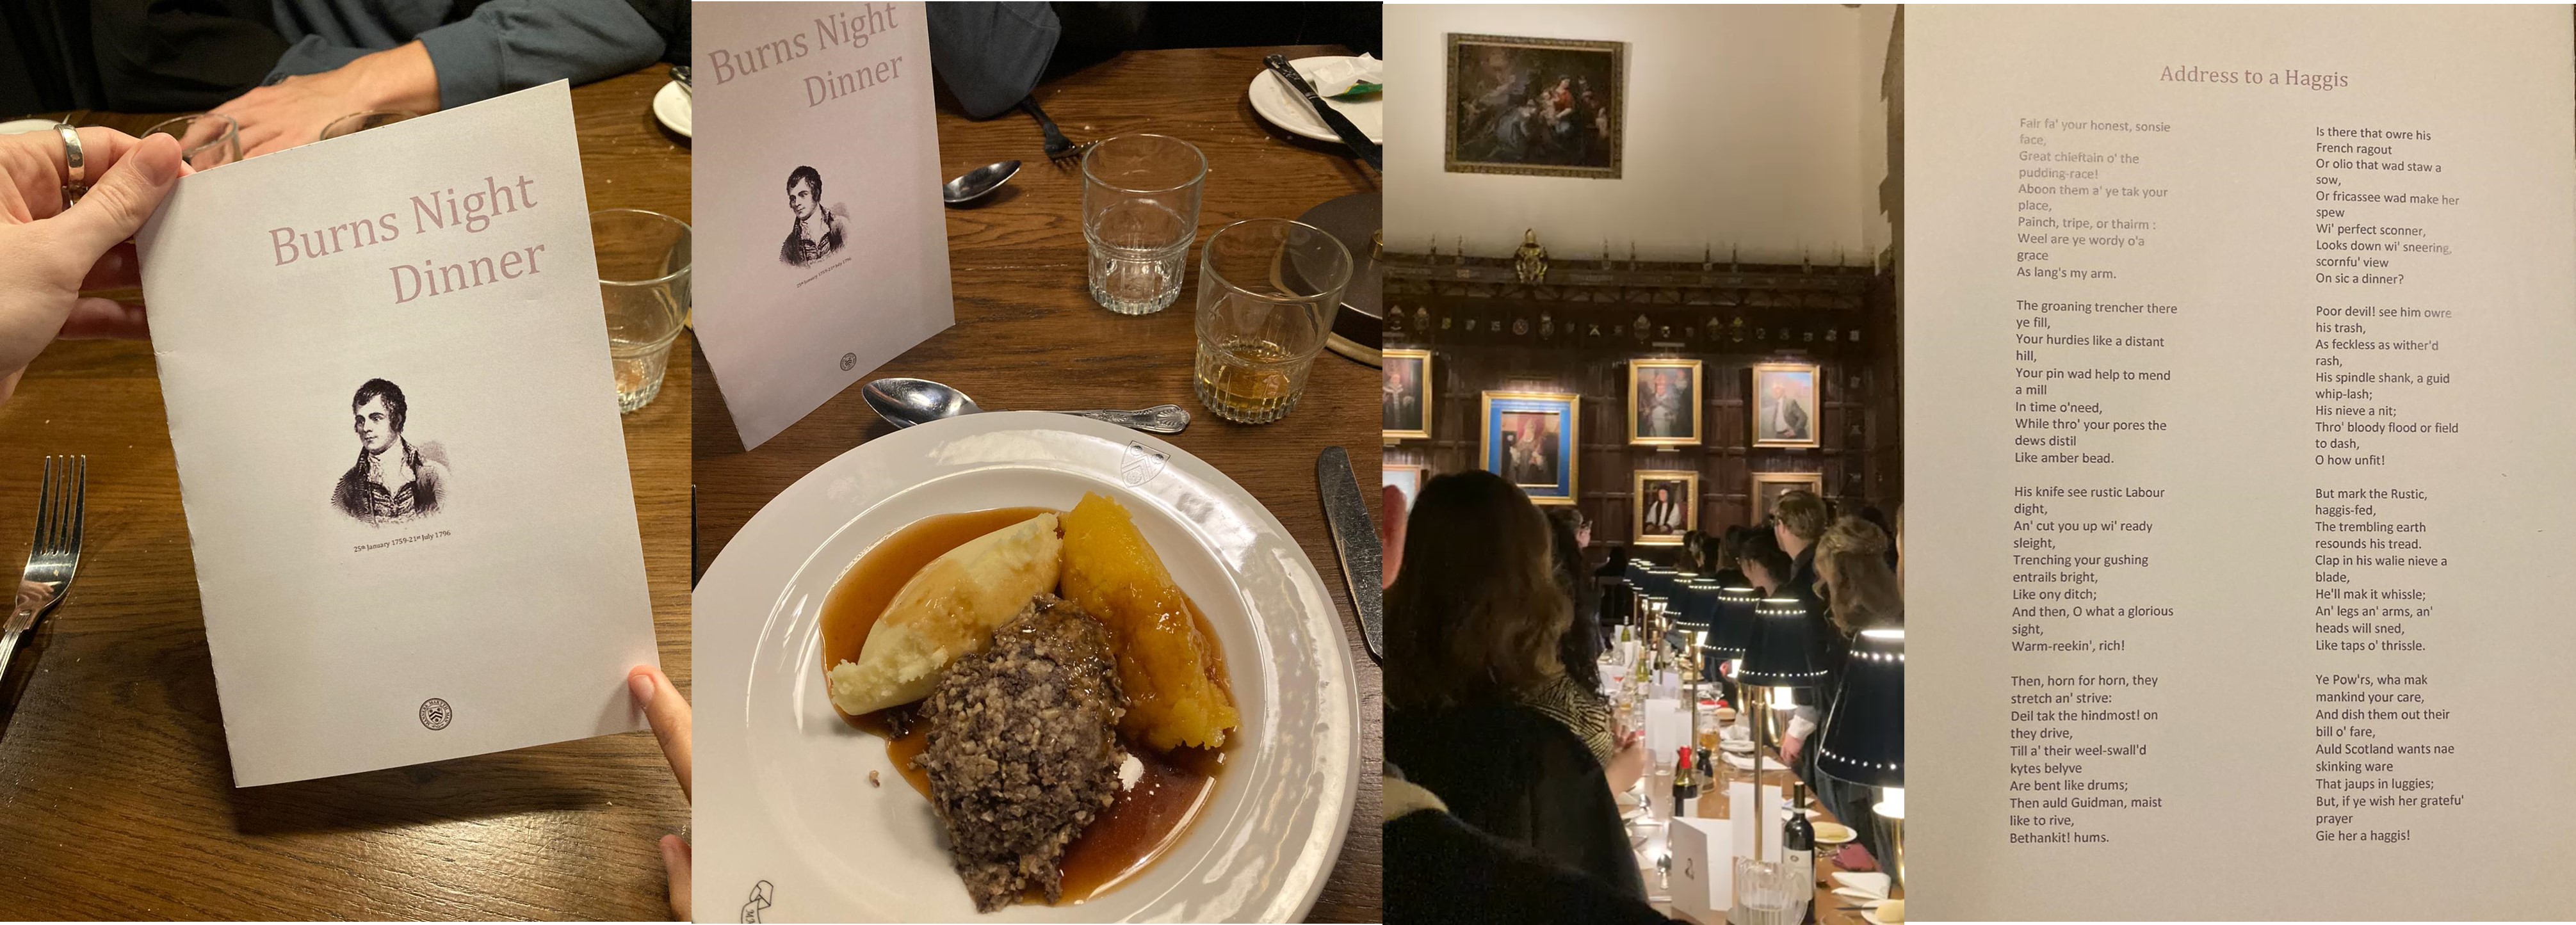 Four part picture: menu featuring Robert Burns portrait; Haggis, neeps and tatties; students watching bagpipers; address to a haggis